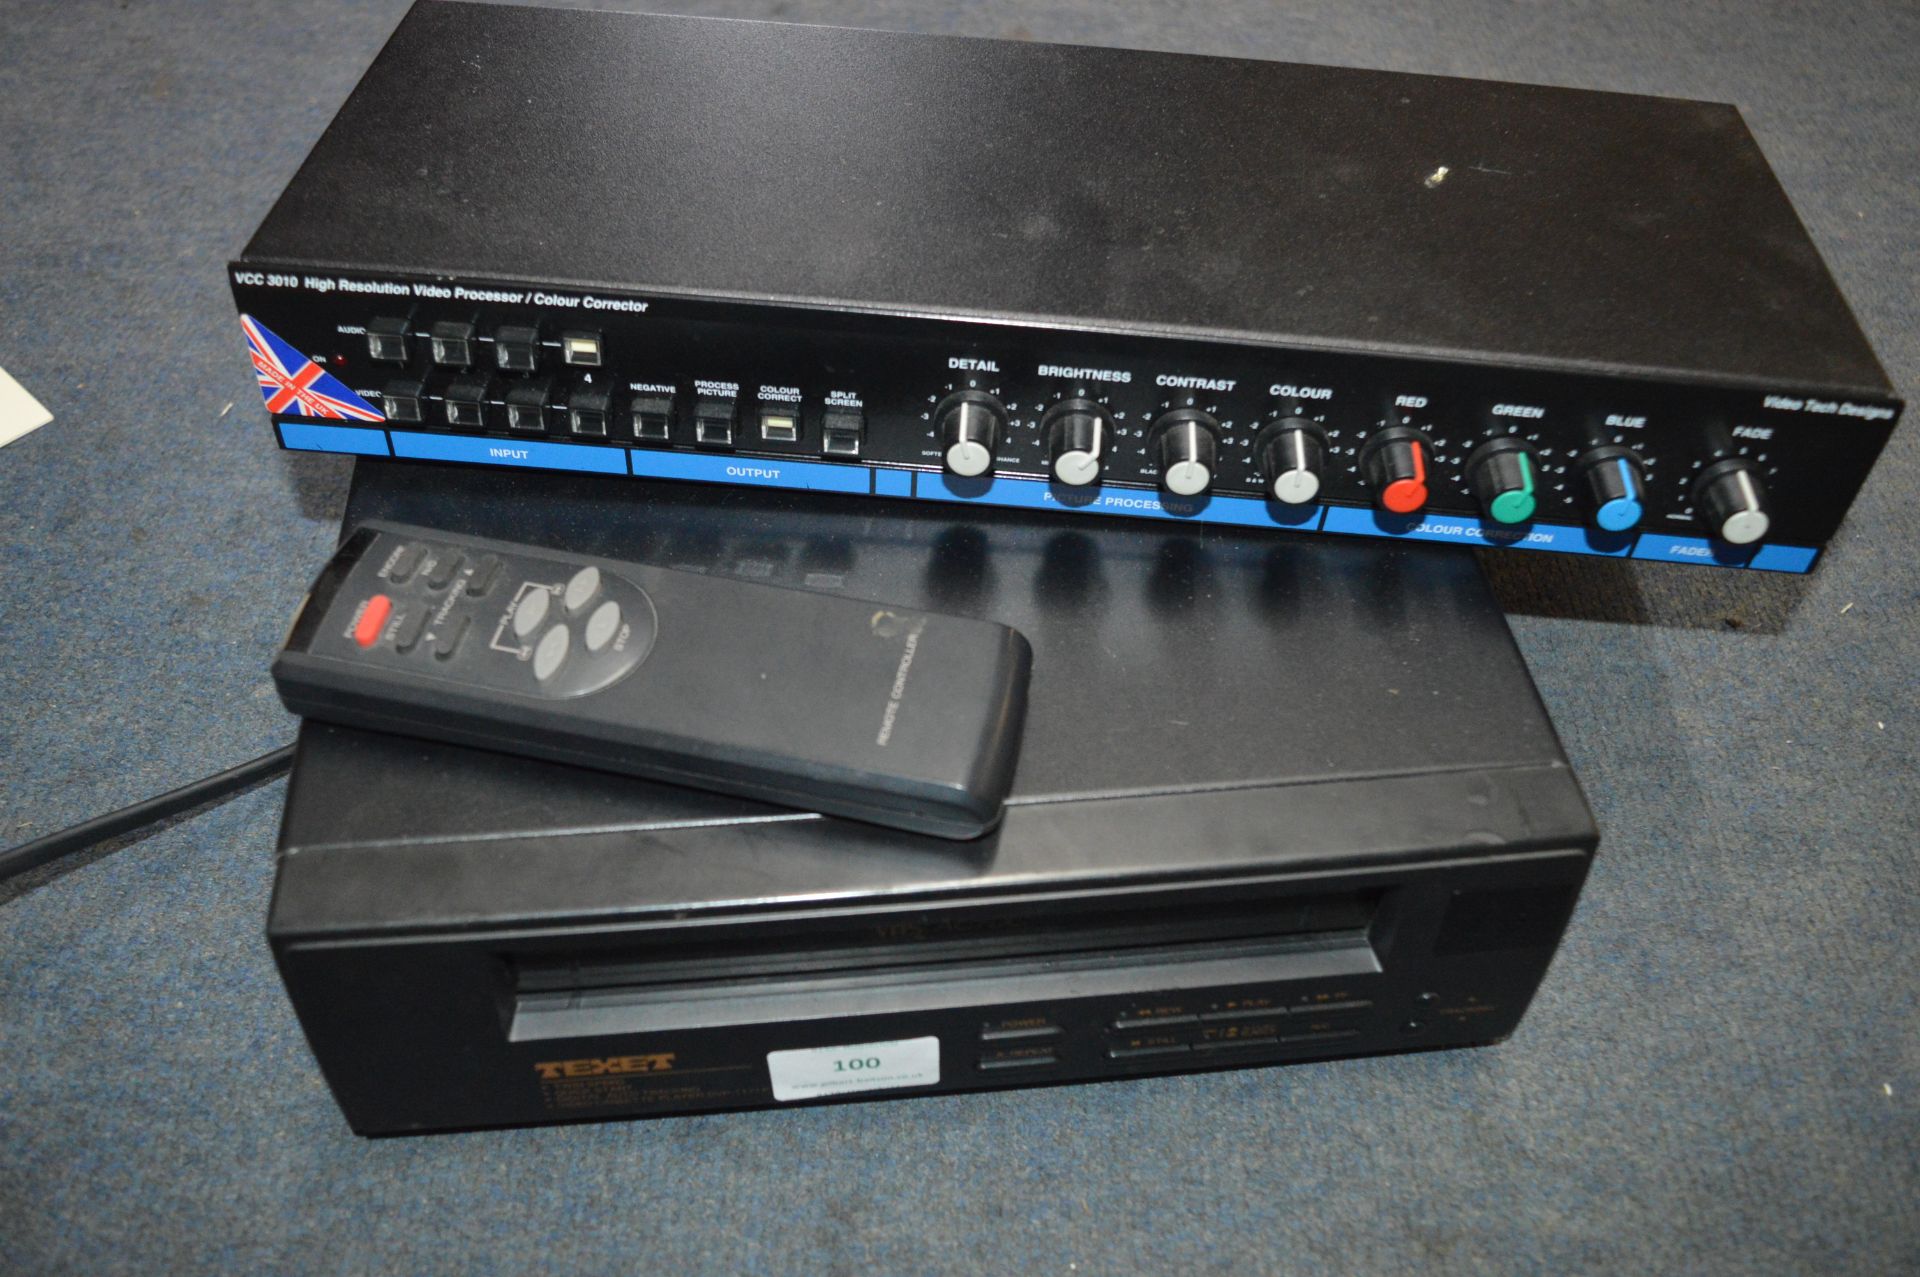 Texet VHS Player and a Videotech Video Processor C